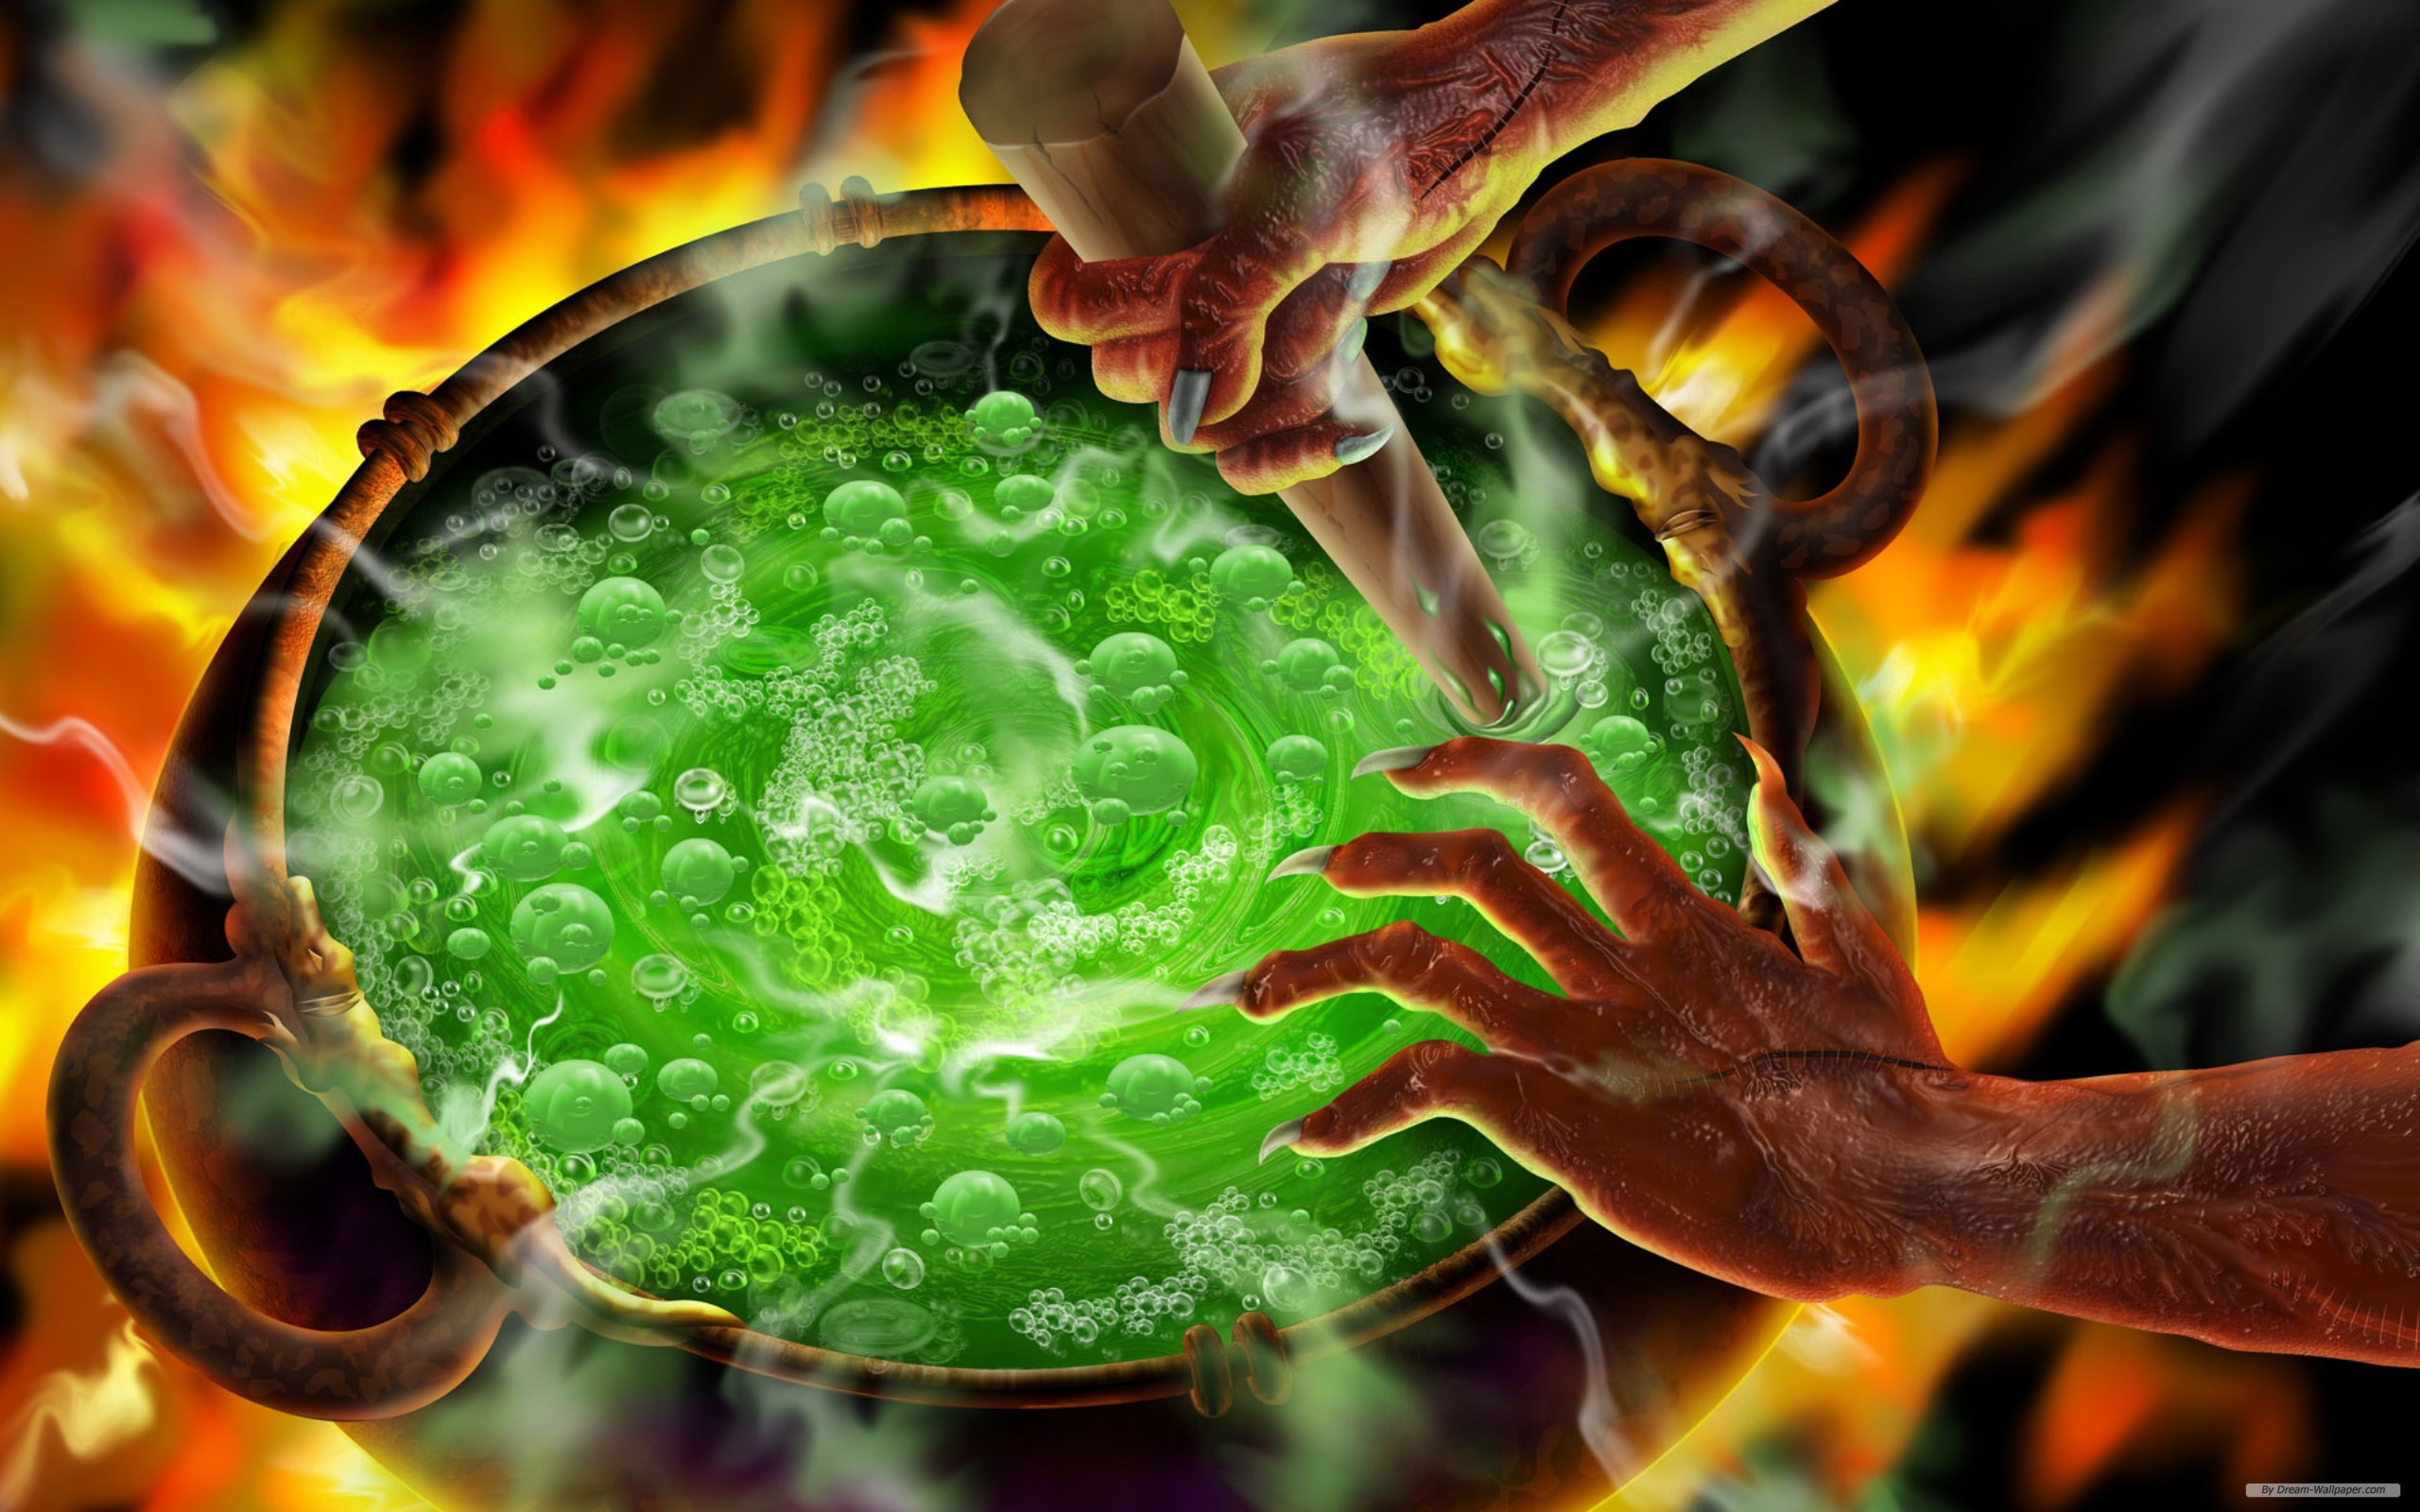 Halloween-themed cauldron filled with a holiday Witch's Brew desktop wallpaper.